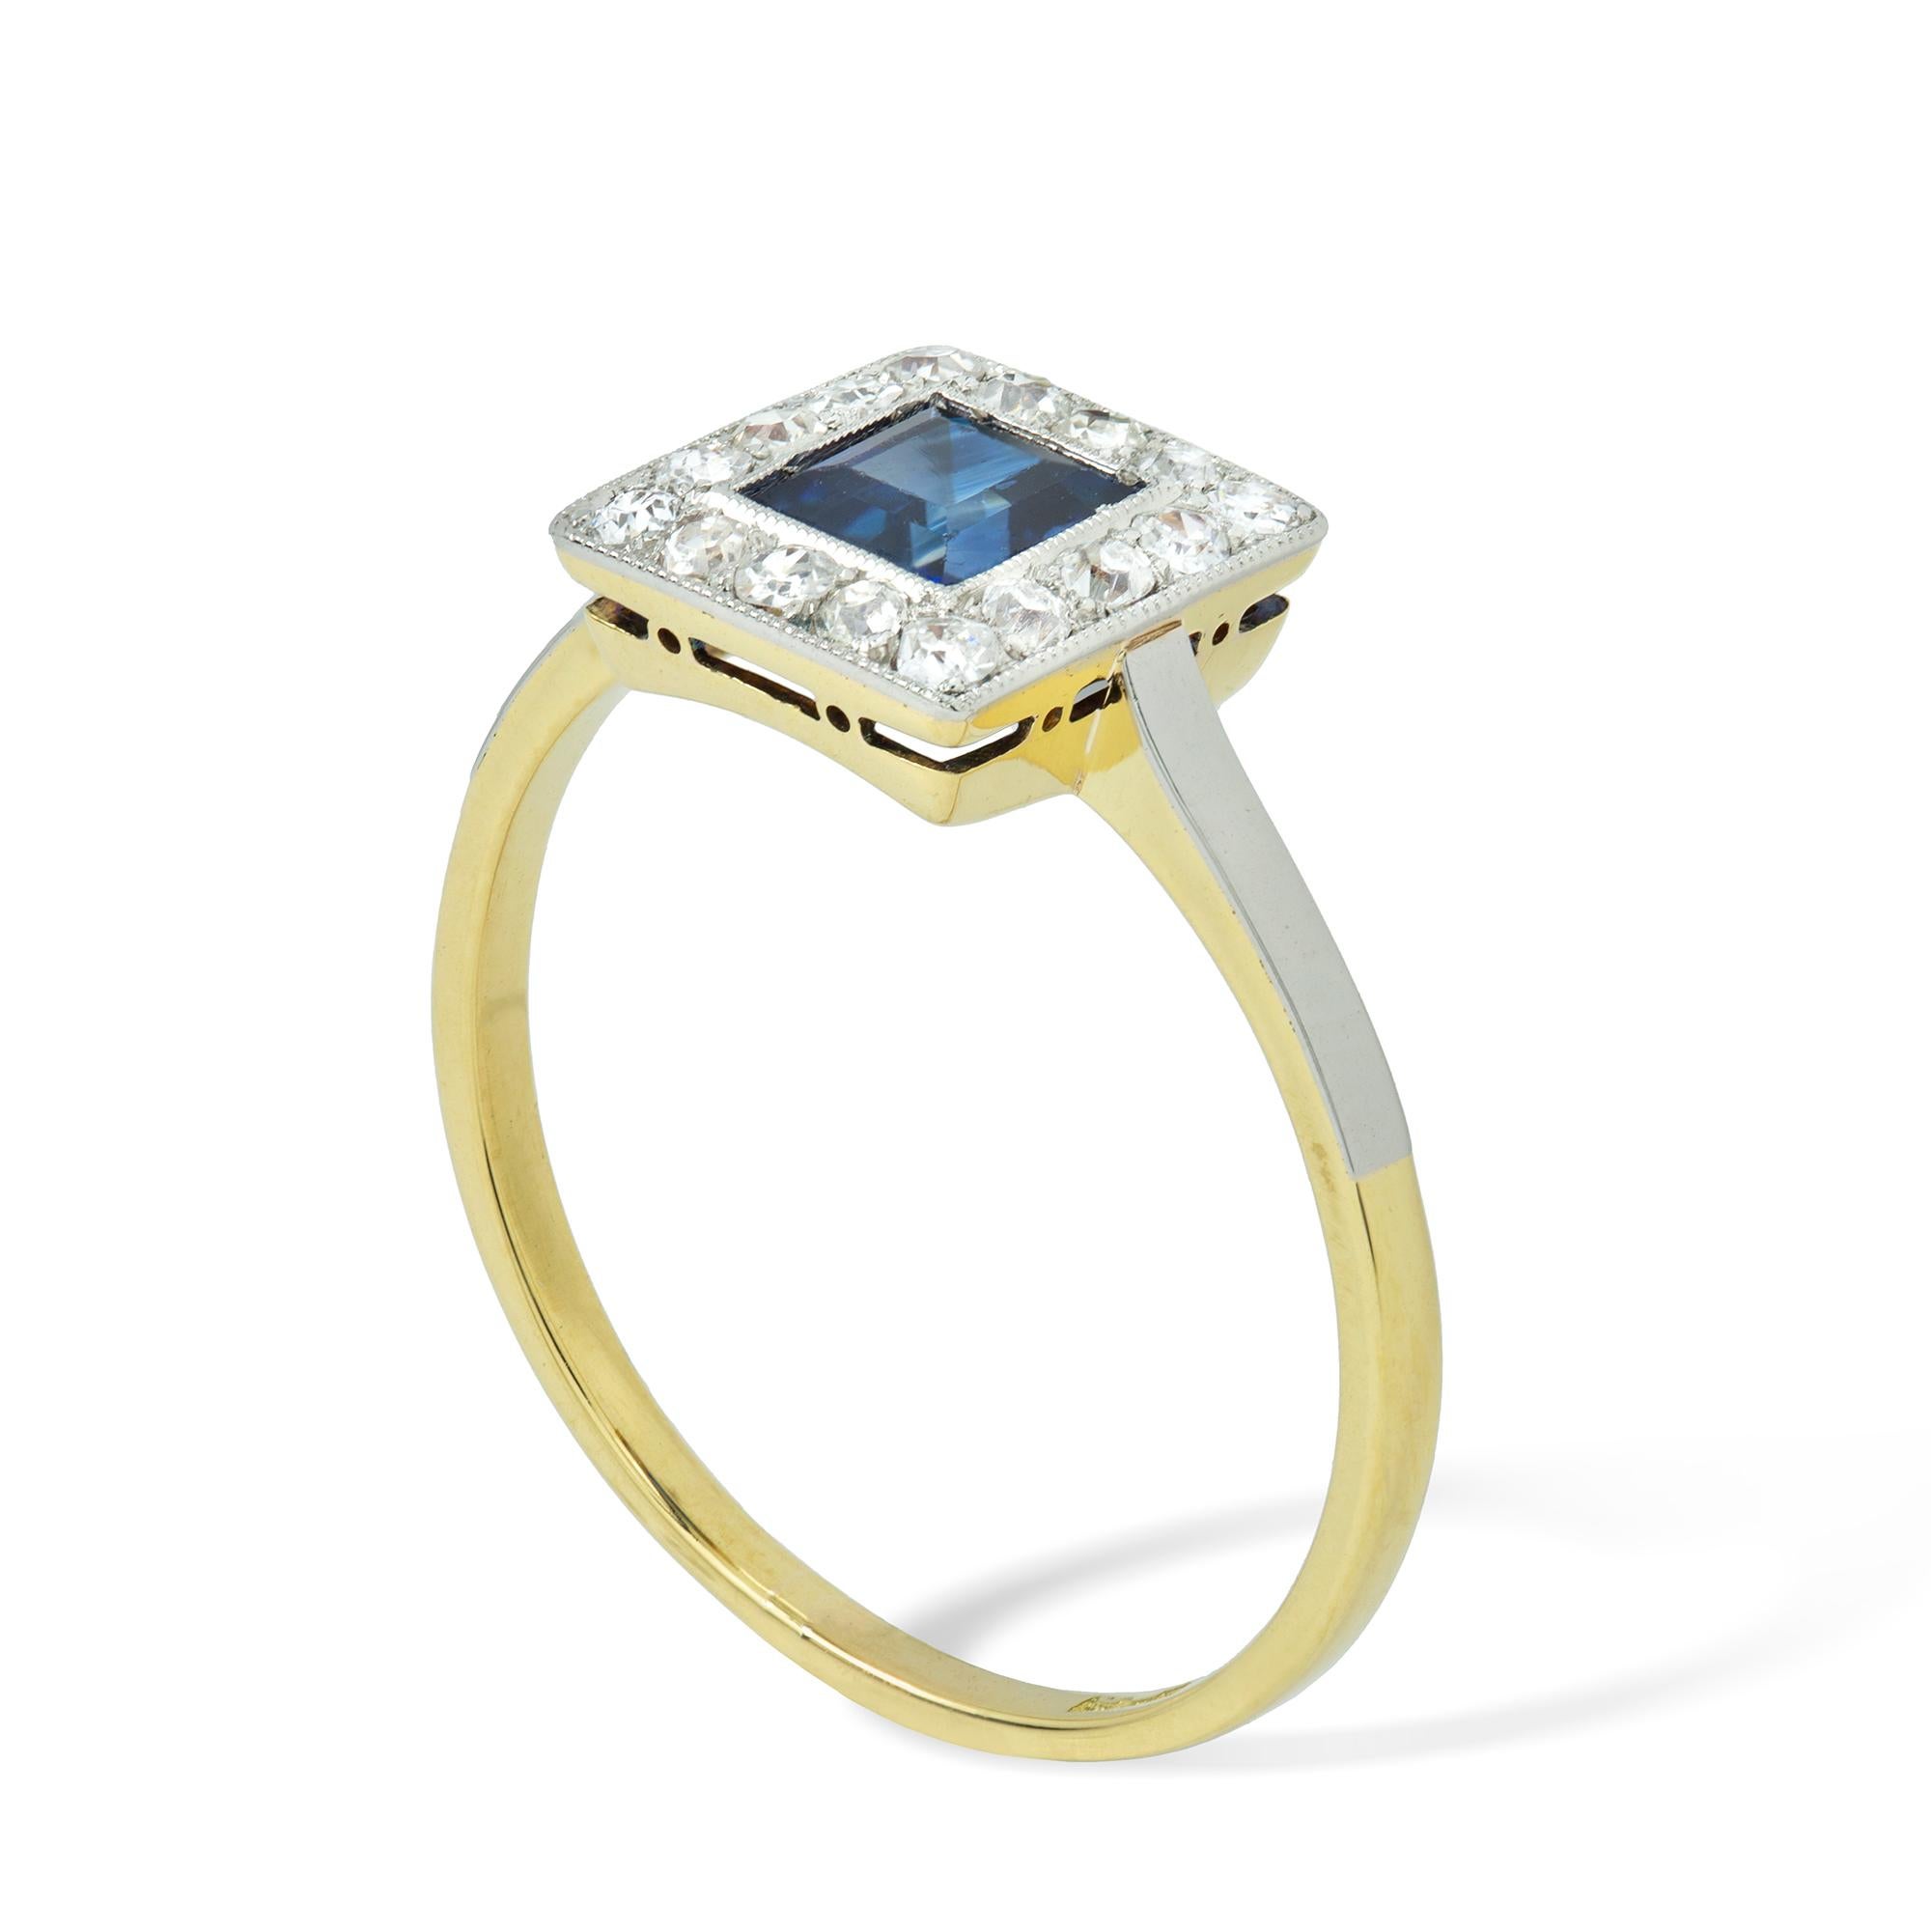 A sapphire and diamond cluster ring, the square sapphire weighing approximately 0.65 carat, surrounded by sixteen old-cut diamonds weighing approximately a total of 0.35 carat, all set in platinum and gold,  circa 1920, head measuring  0.9x0.9cm,